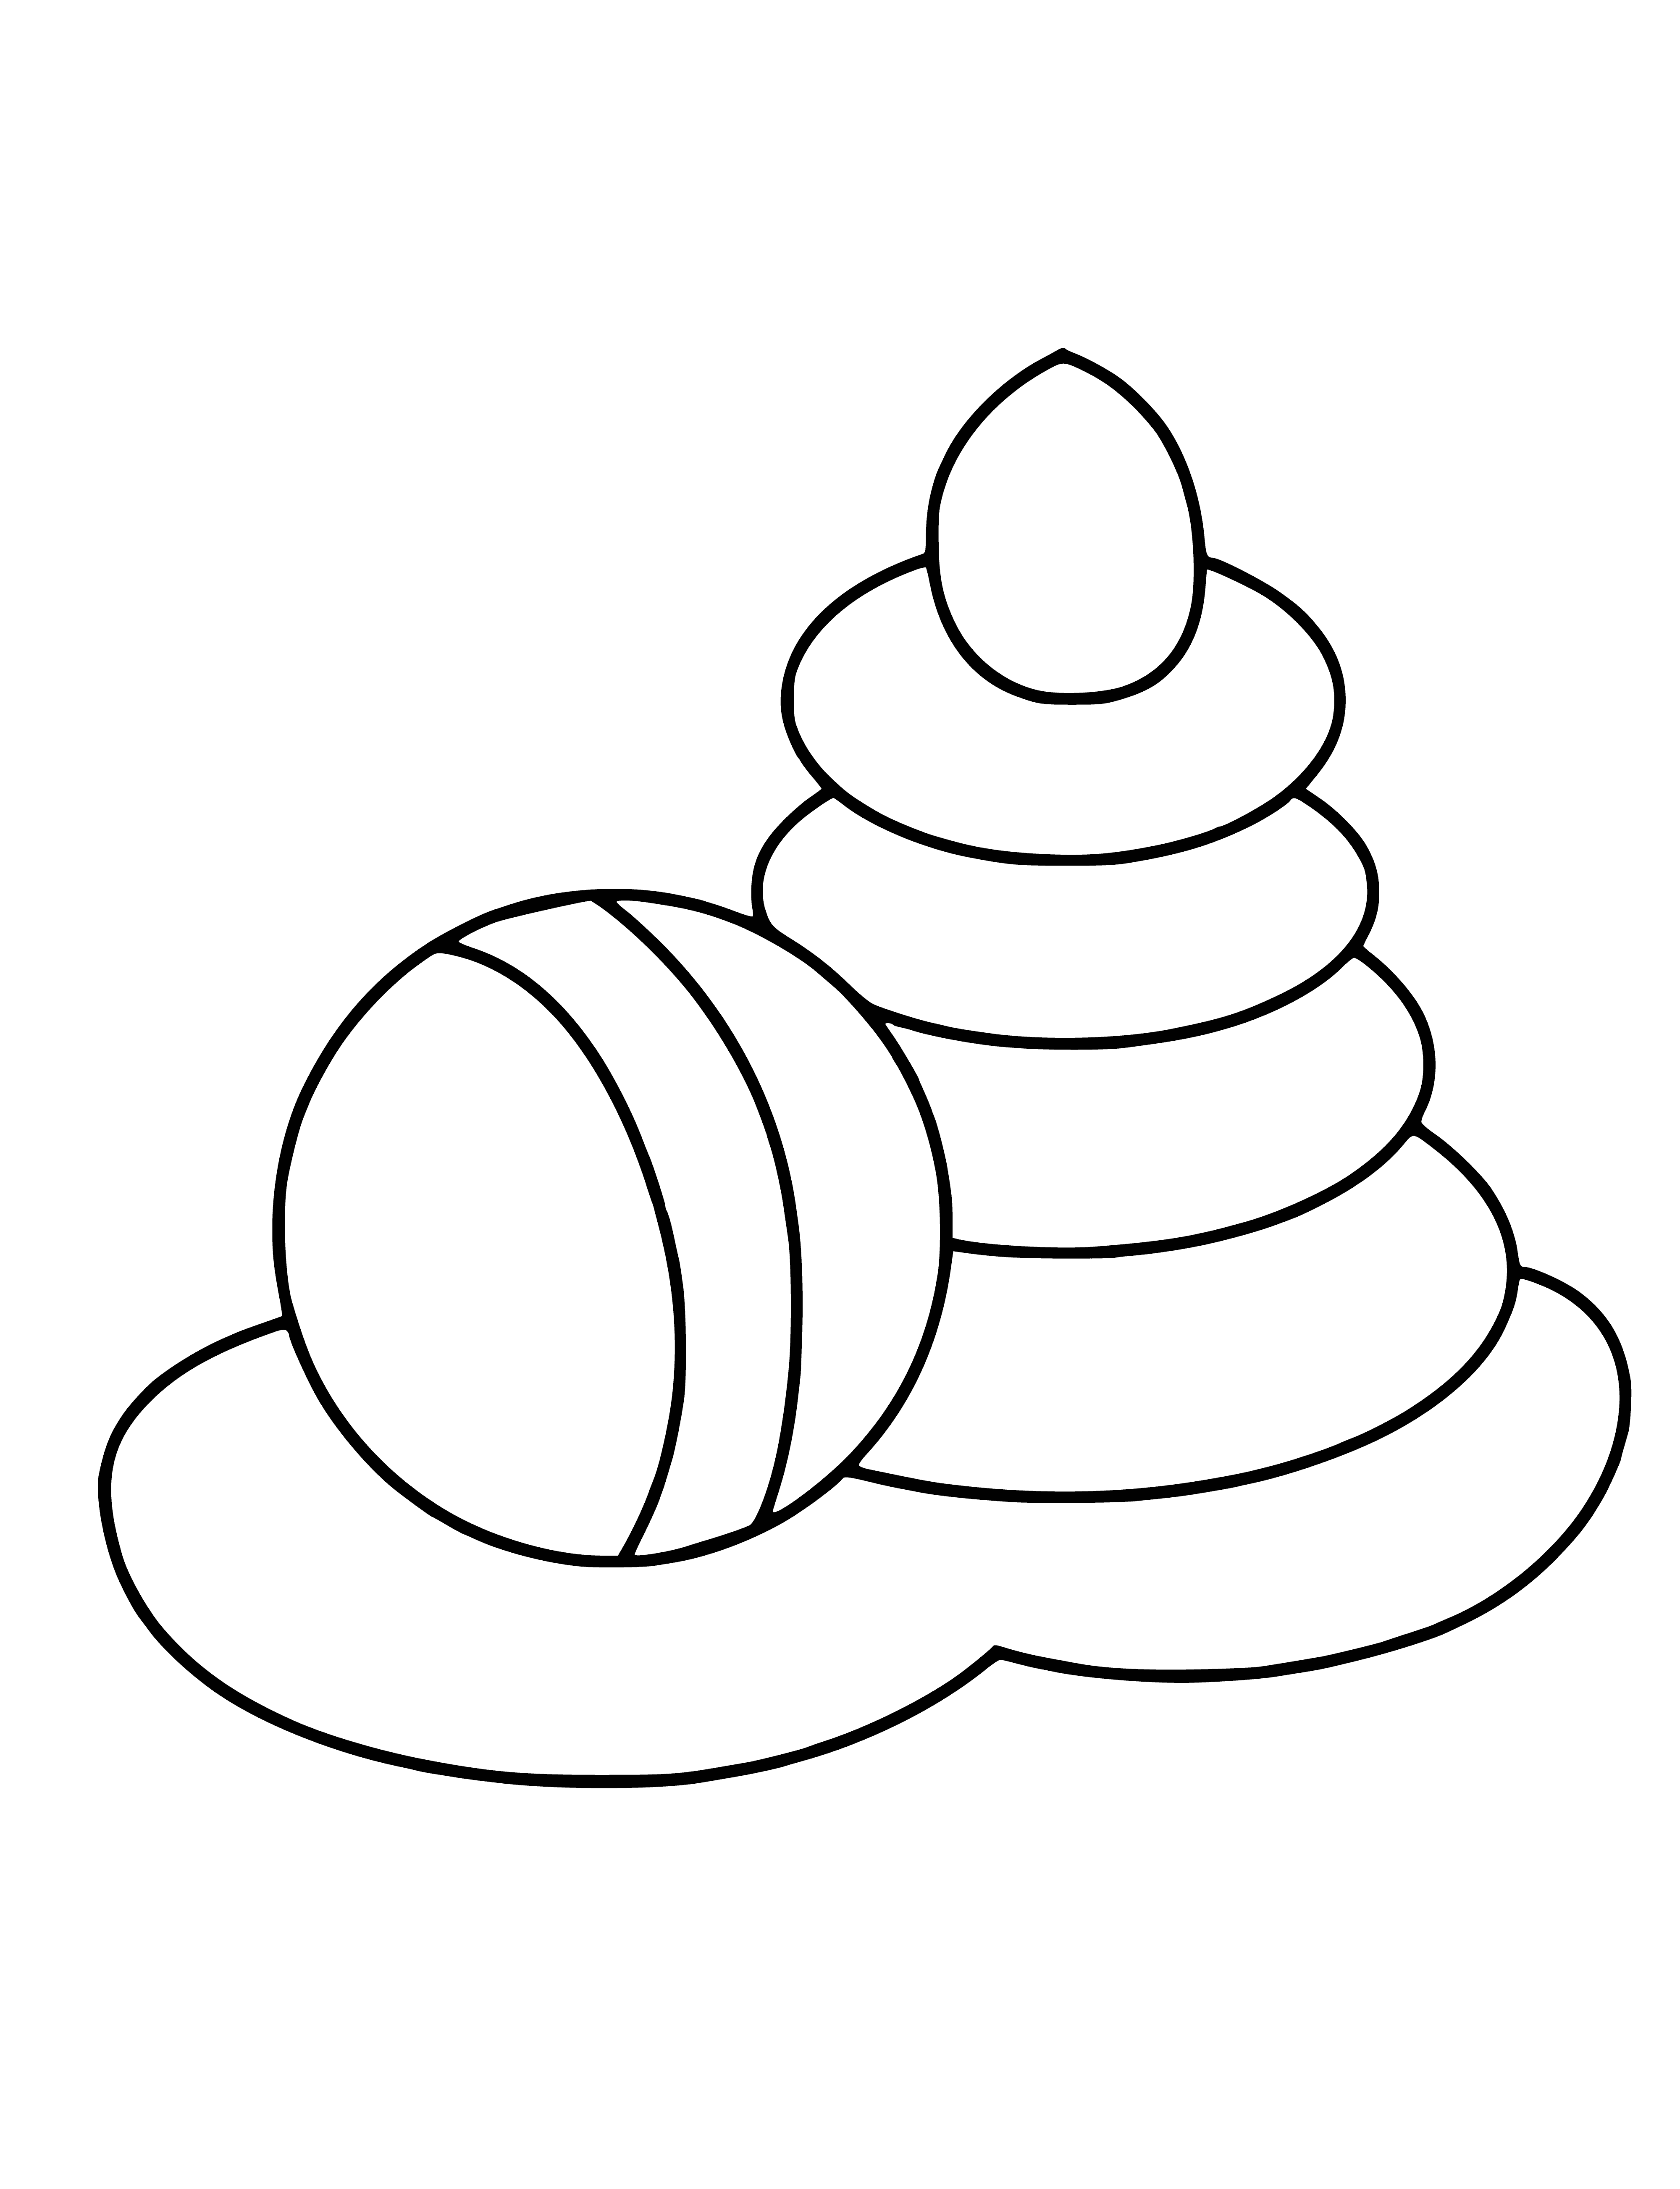 coloring page: Ball on the ground and pyramid on top, pointing up.